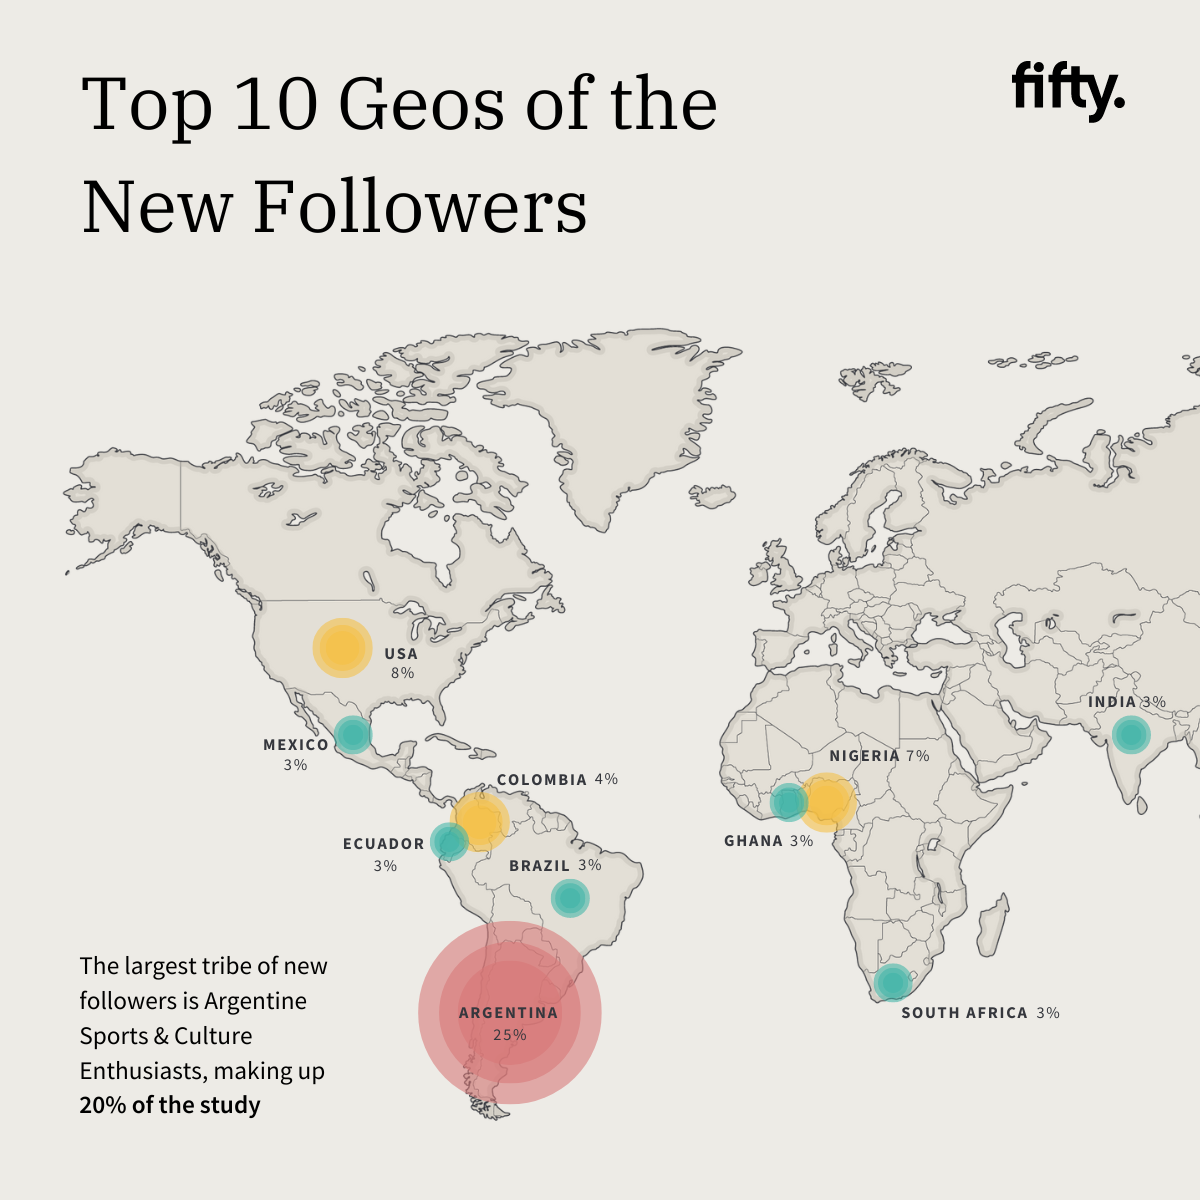 Top Ten Geos of Messi's New Followers